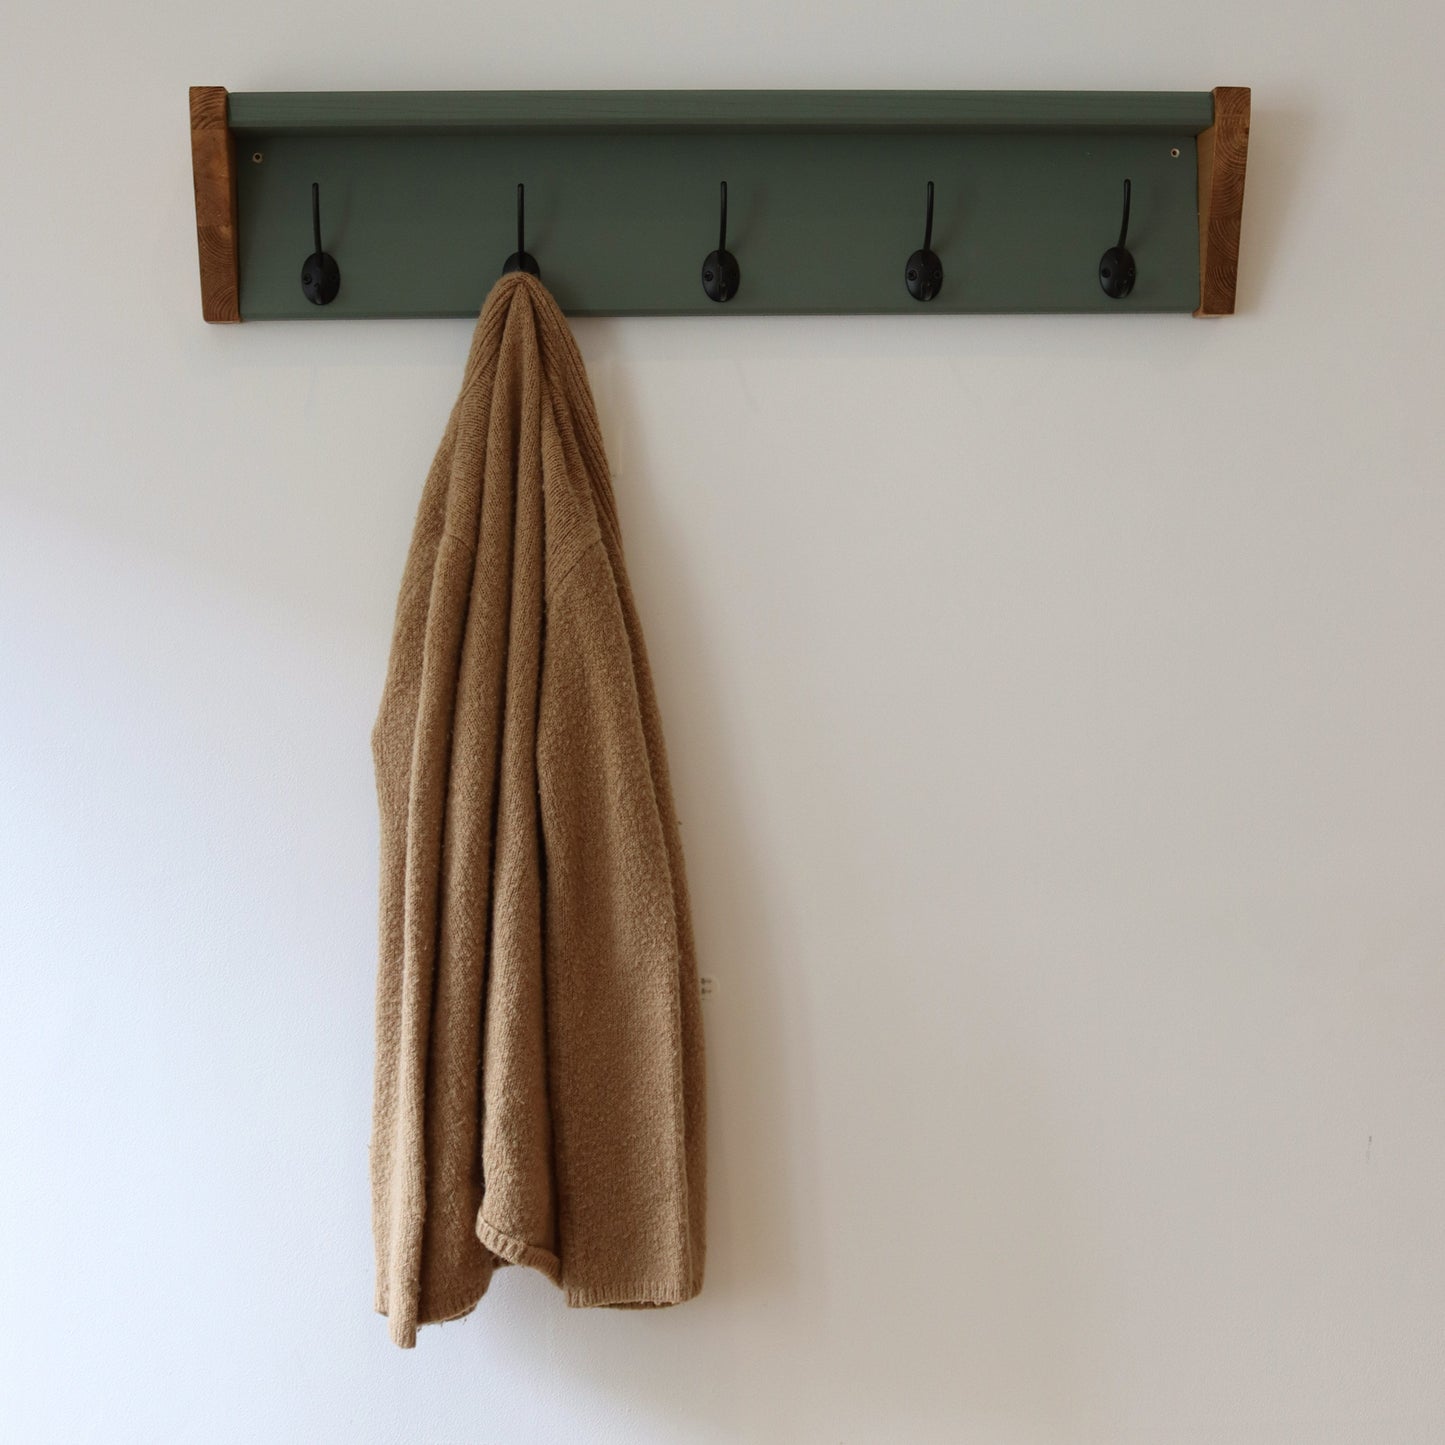 Coat Hook and Shoe Rack Storage Narrow 120 cm by 22 cm by 45 cm